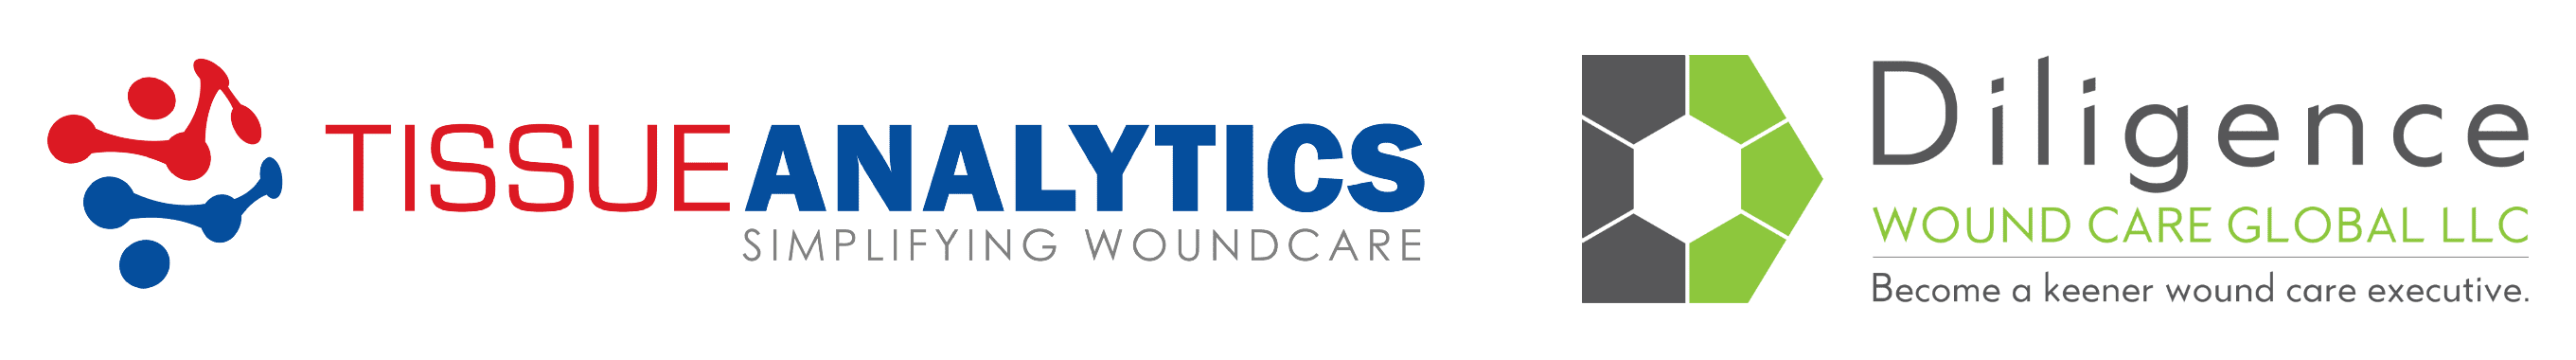 Diligence Wound Care Global Managing Director Rafael Mazuz Joins Tissue Analytics Board as Independent Director